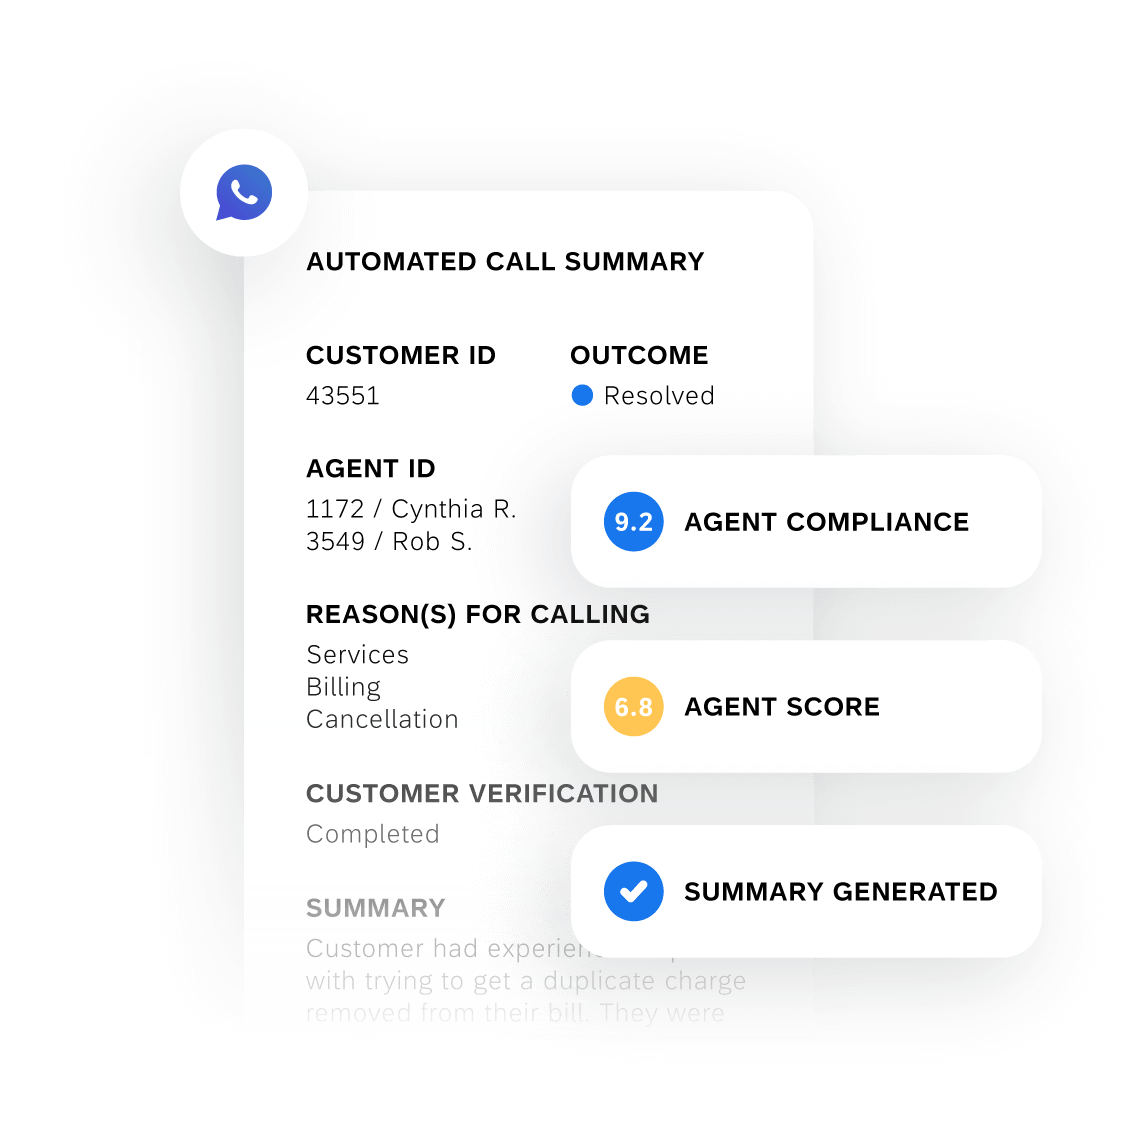 Automated call summary report